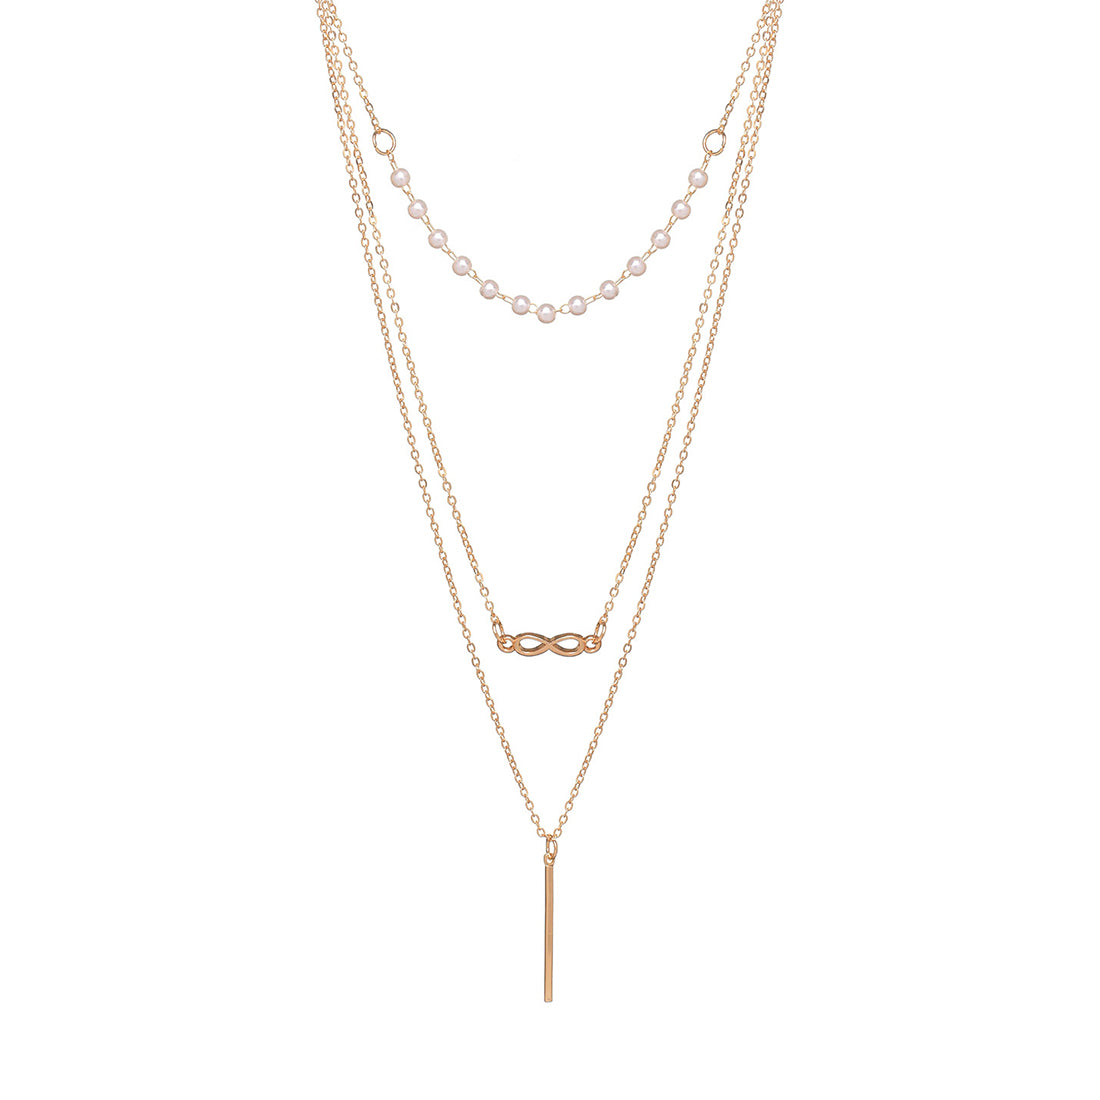 Trendy Three Layered Gold Necklace with Pearls Chain and Infinity